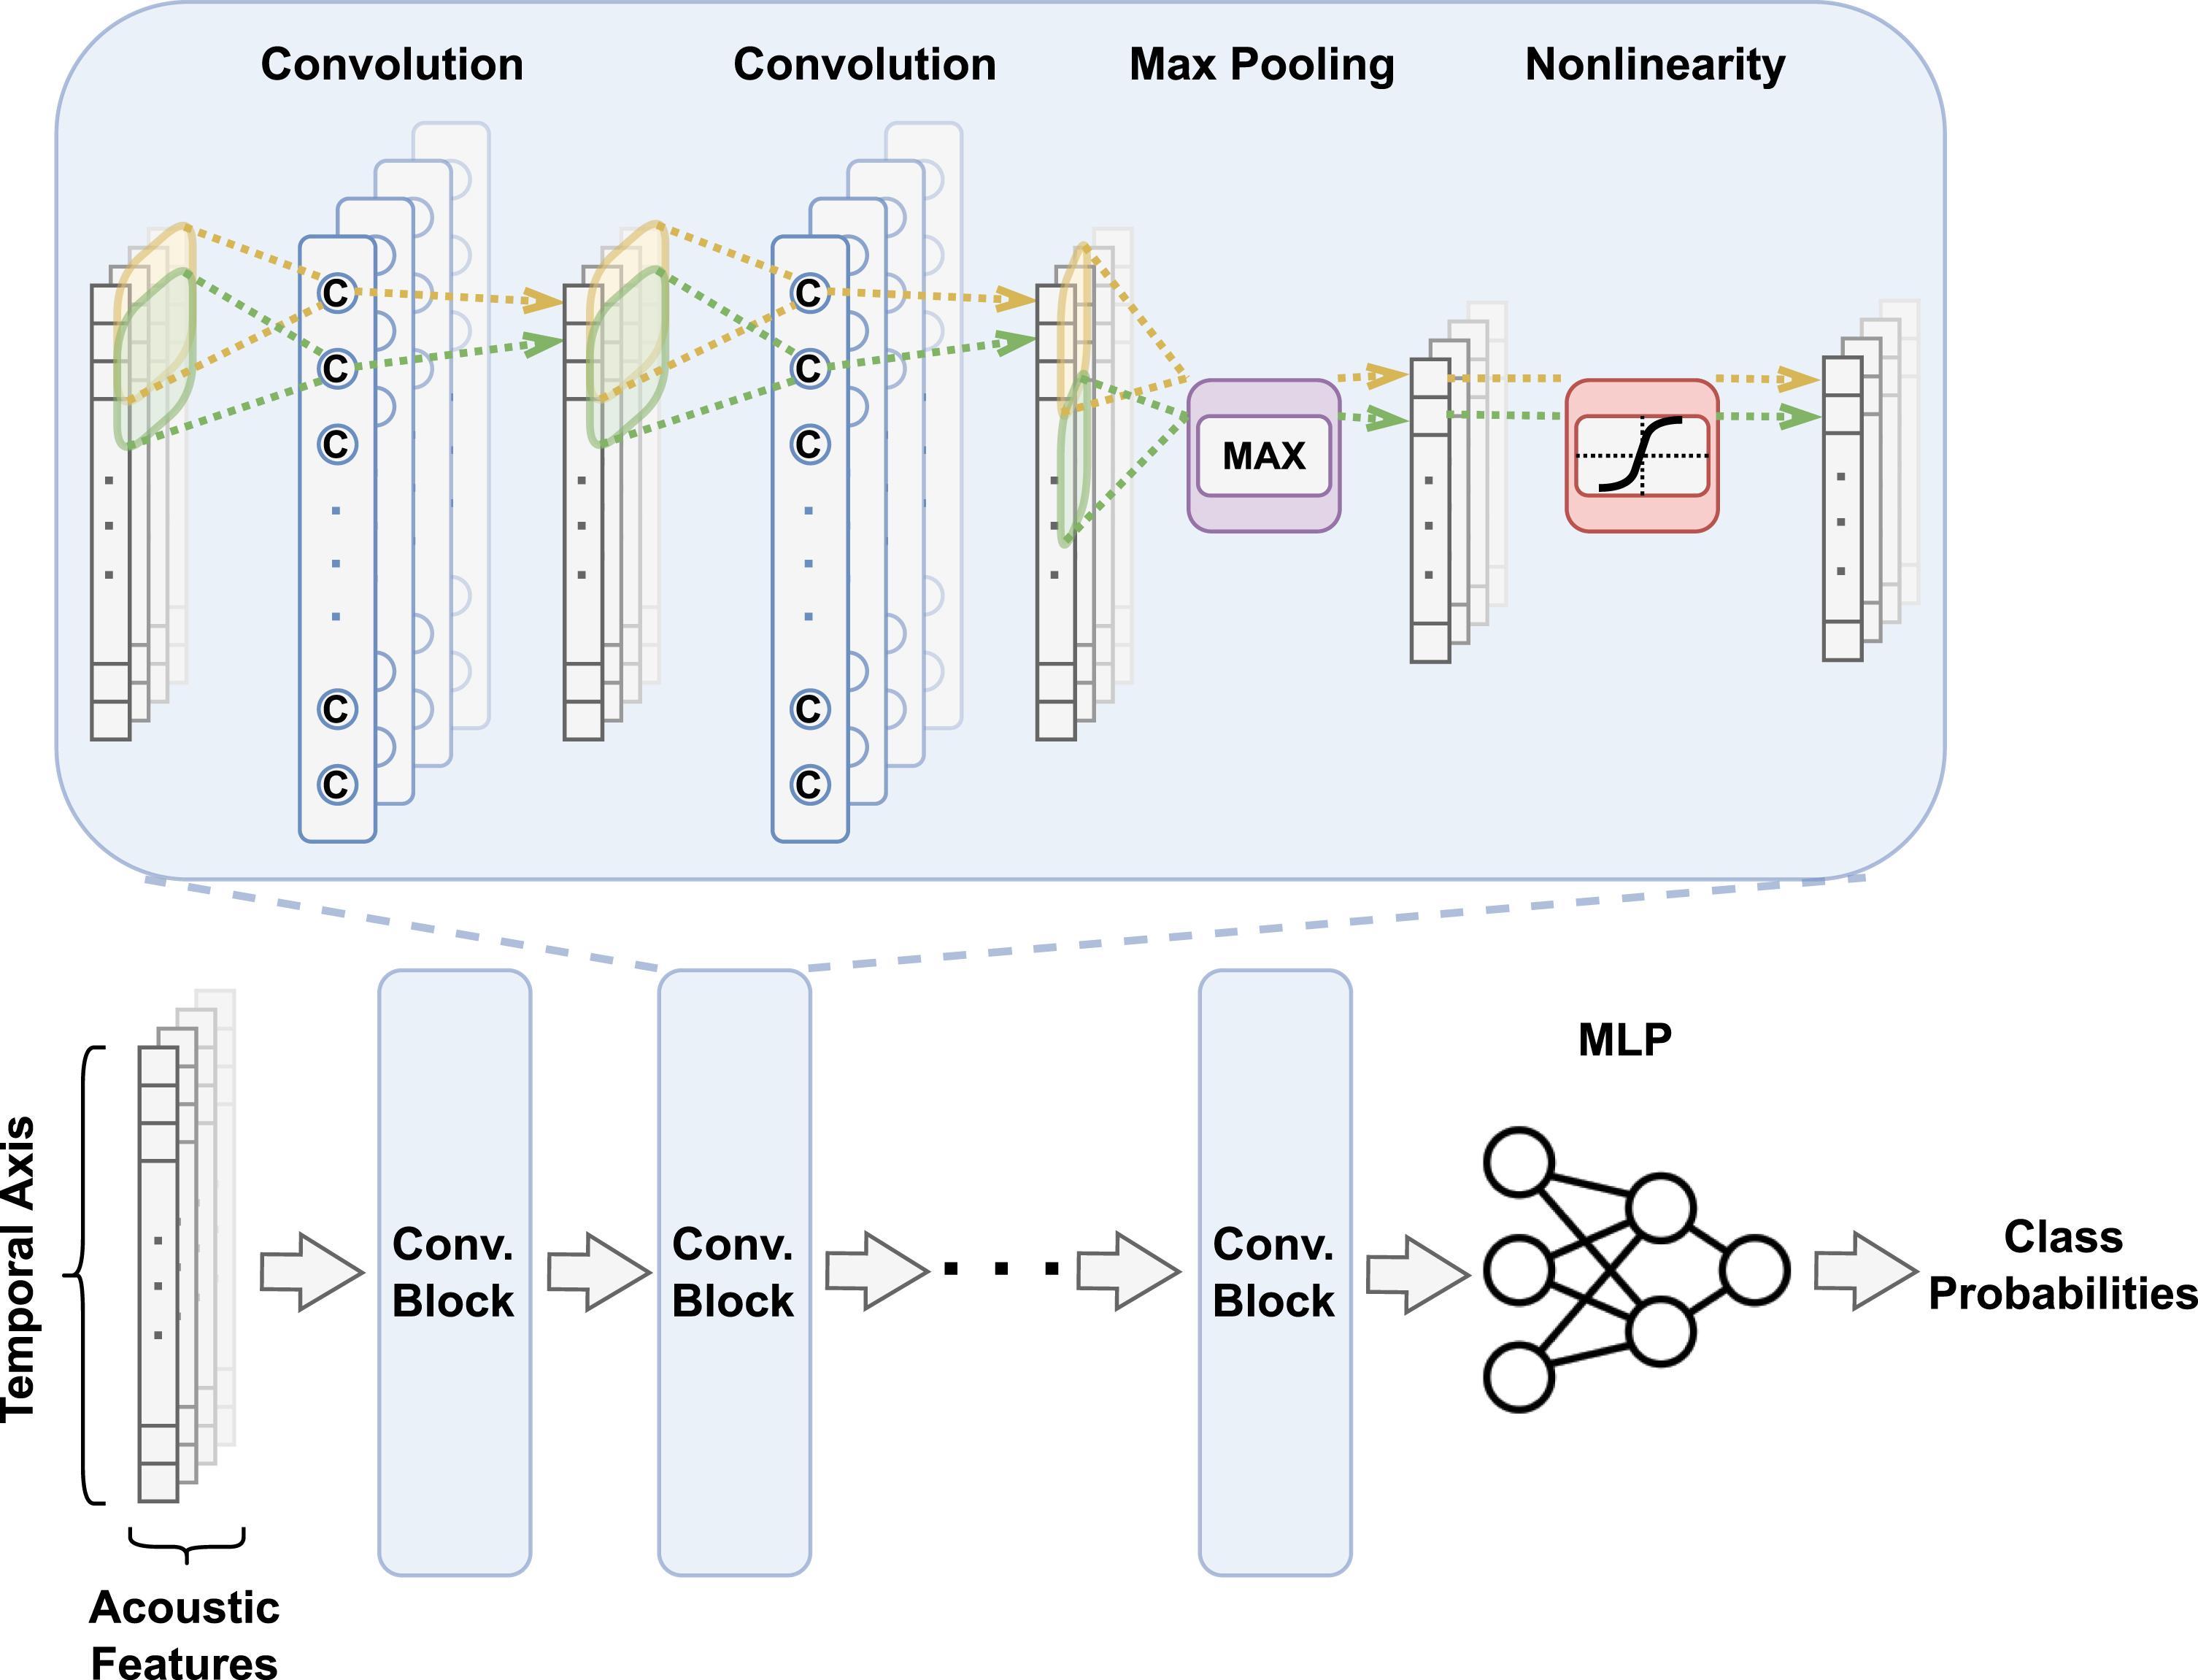 Convolutional neural network. The input to the neural network is a set of vectors representing temporally varying features of an entire voice recording. Early feature fusion is performed such that the convolutional operator processes the features together during the entire training cycle. After a series of convolutional steps, the learned features are fed into a multilayer perceptron followed by associating it with the output label of interest to estimate class-level probabilities.